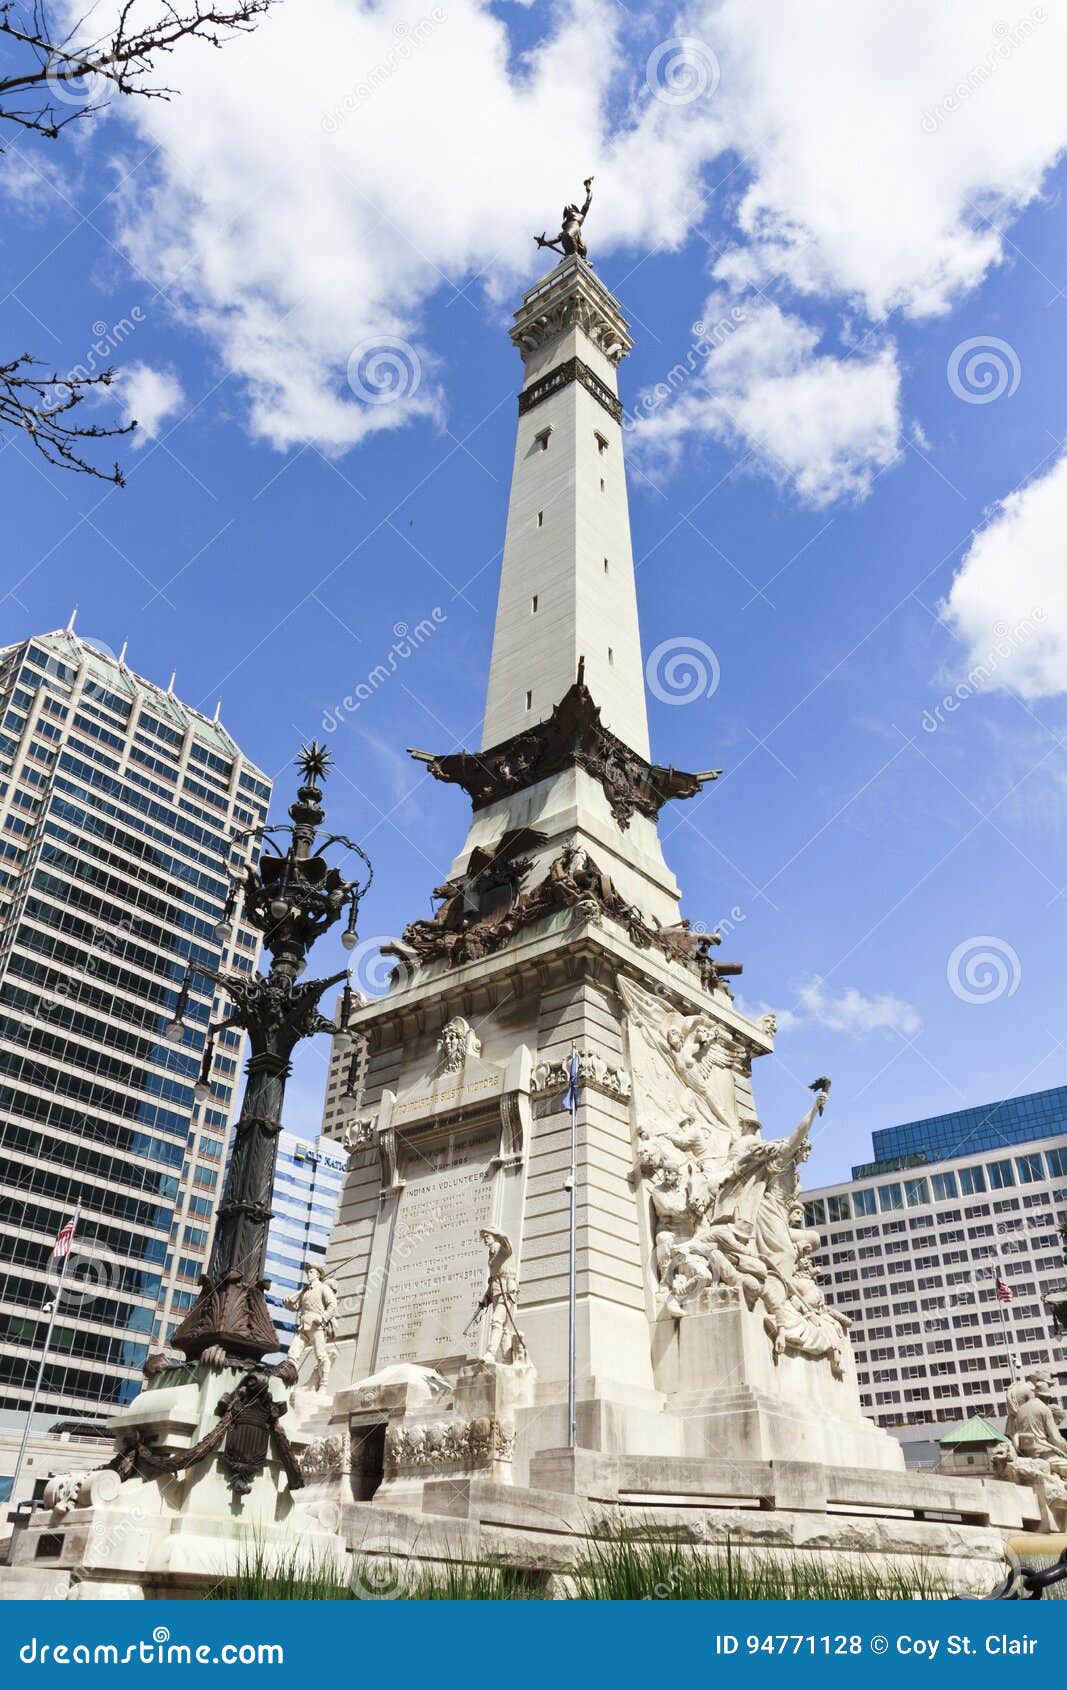 indianapolis, indiana - famous saints and sailors monument